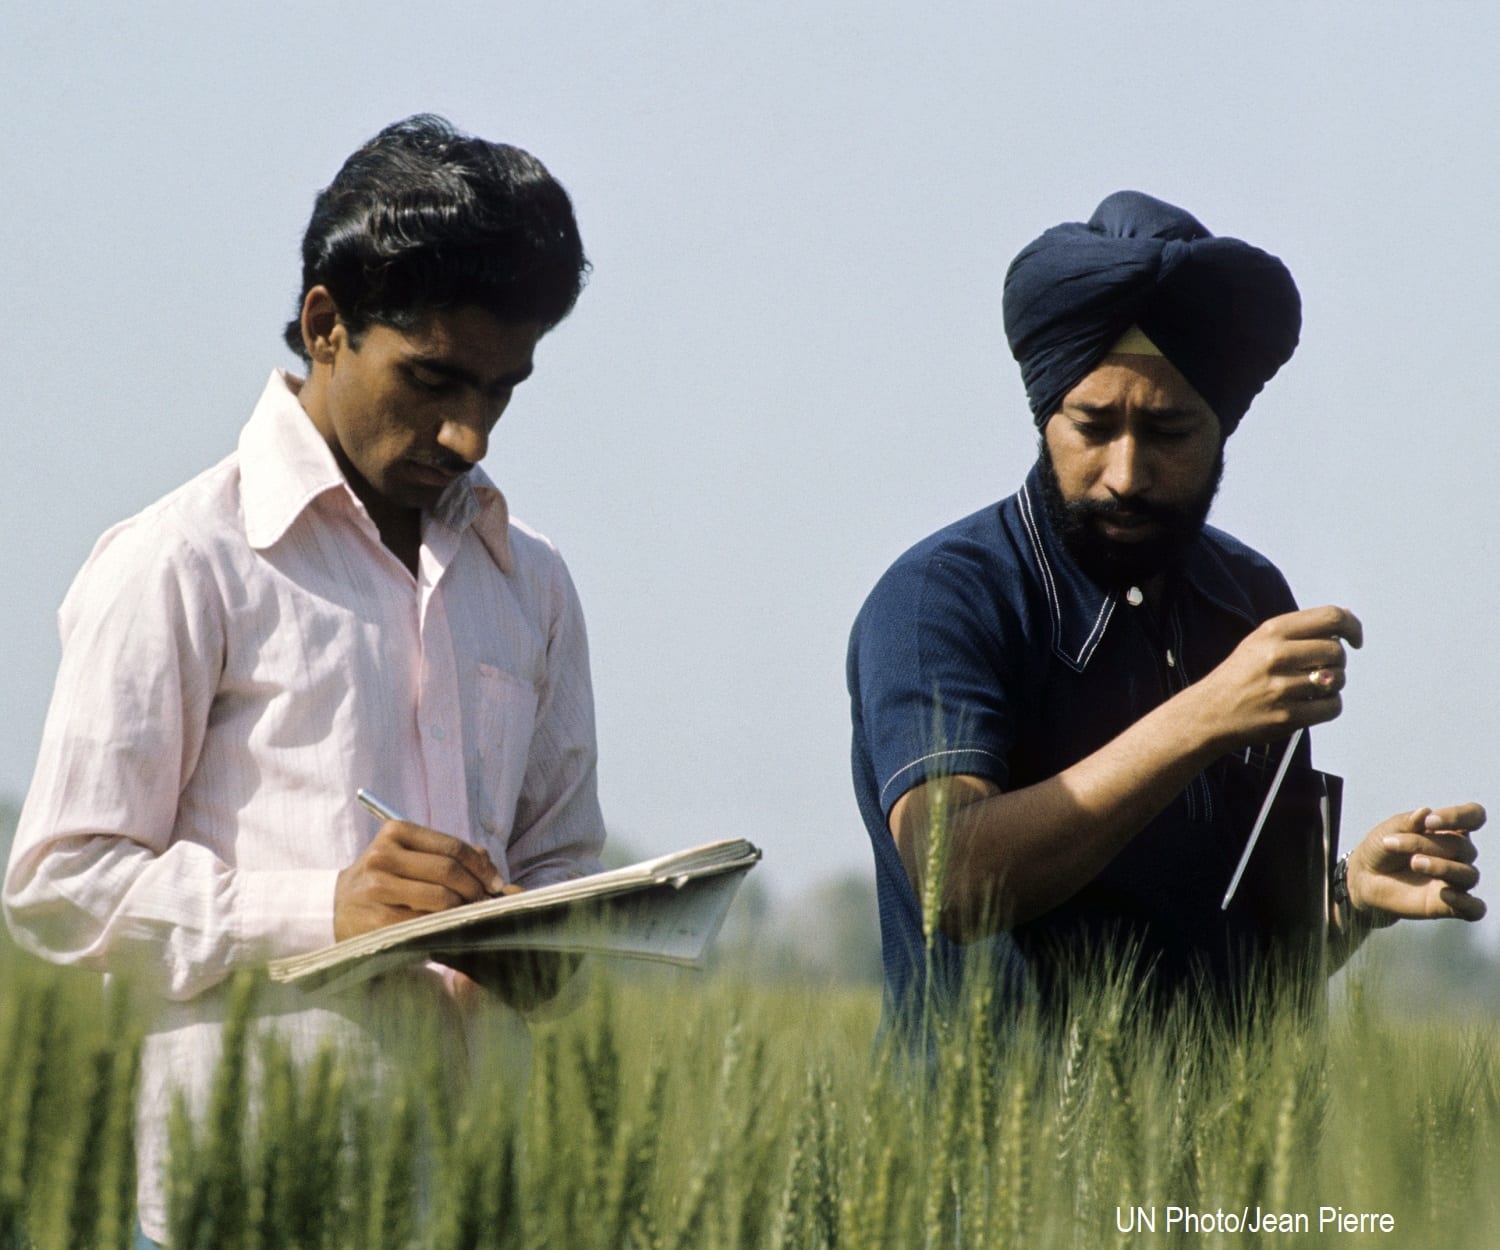 Two men conduct experiments in a cultivated wheat field in India